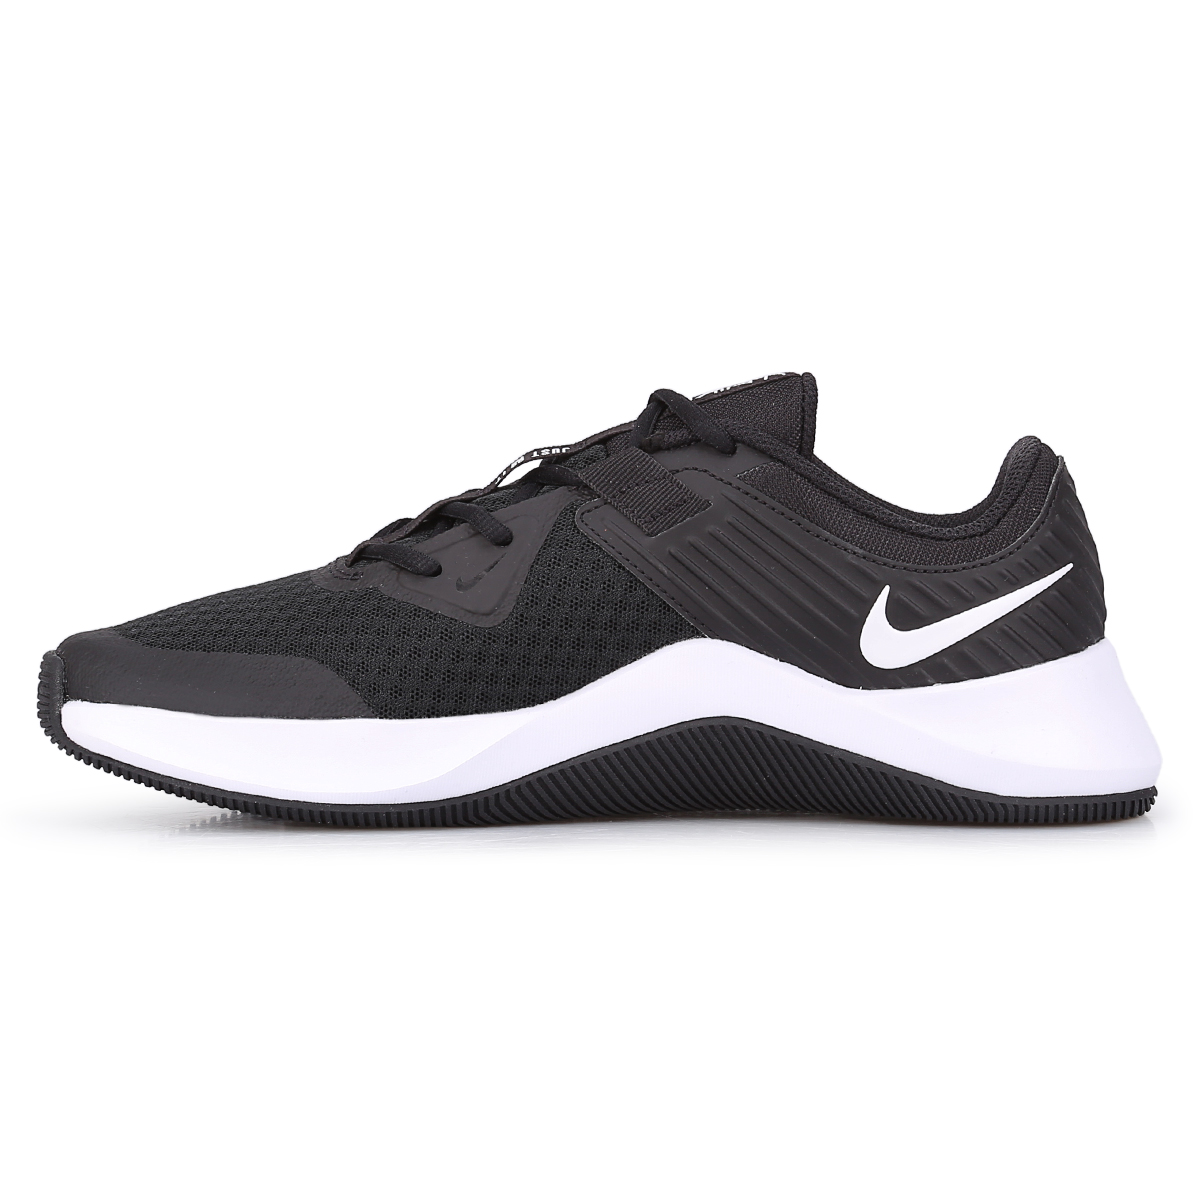 Zapatillas Nike Mc Trainer,  image number null